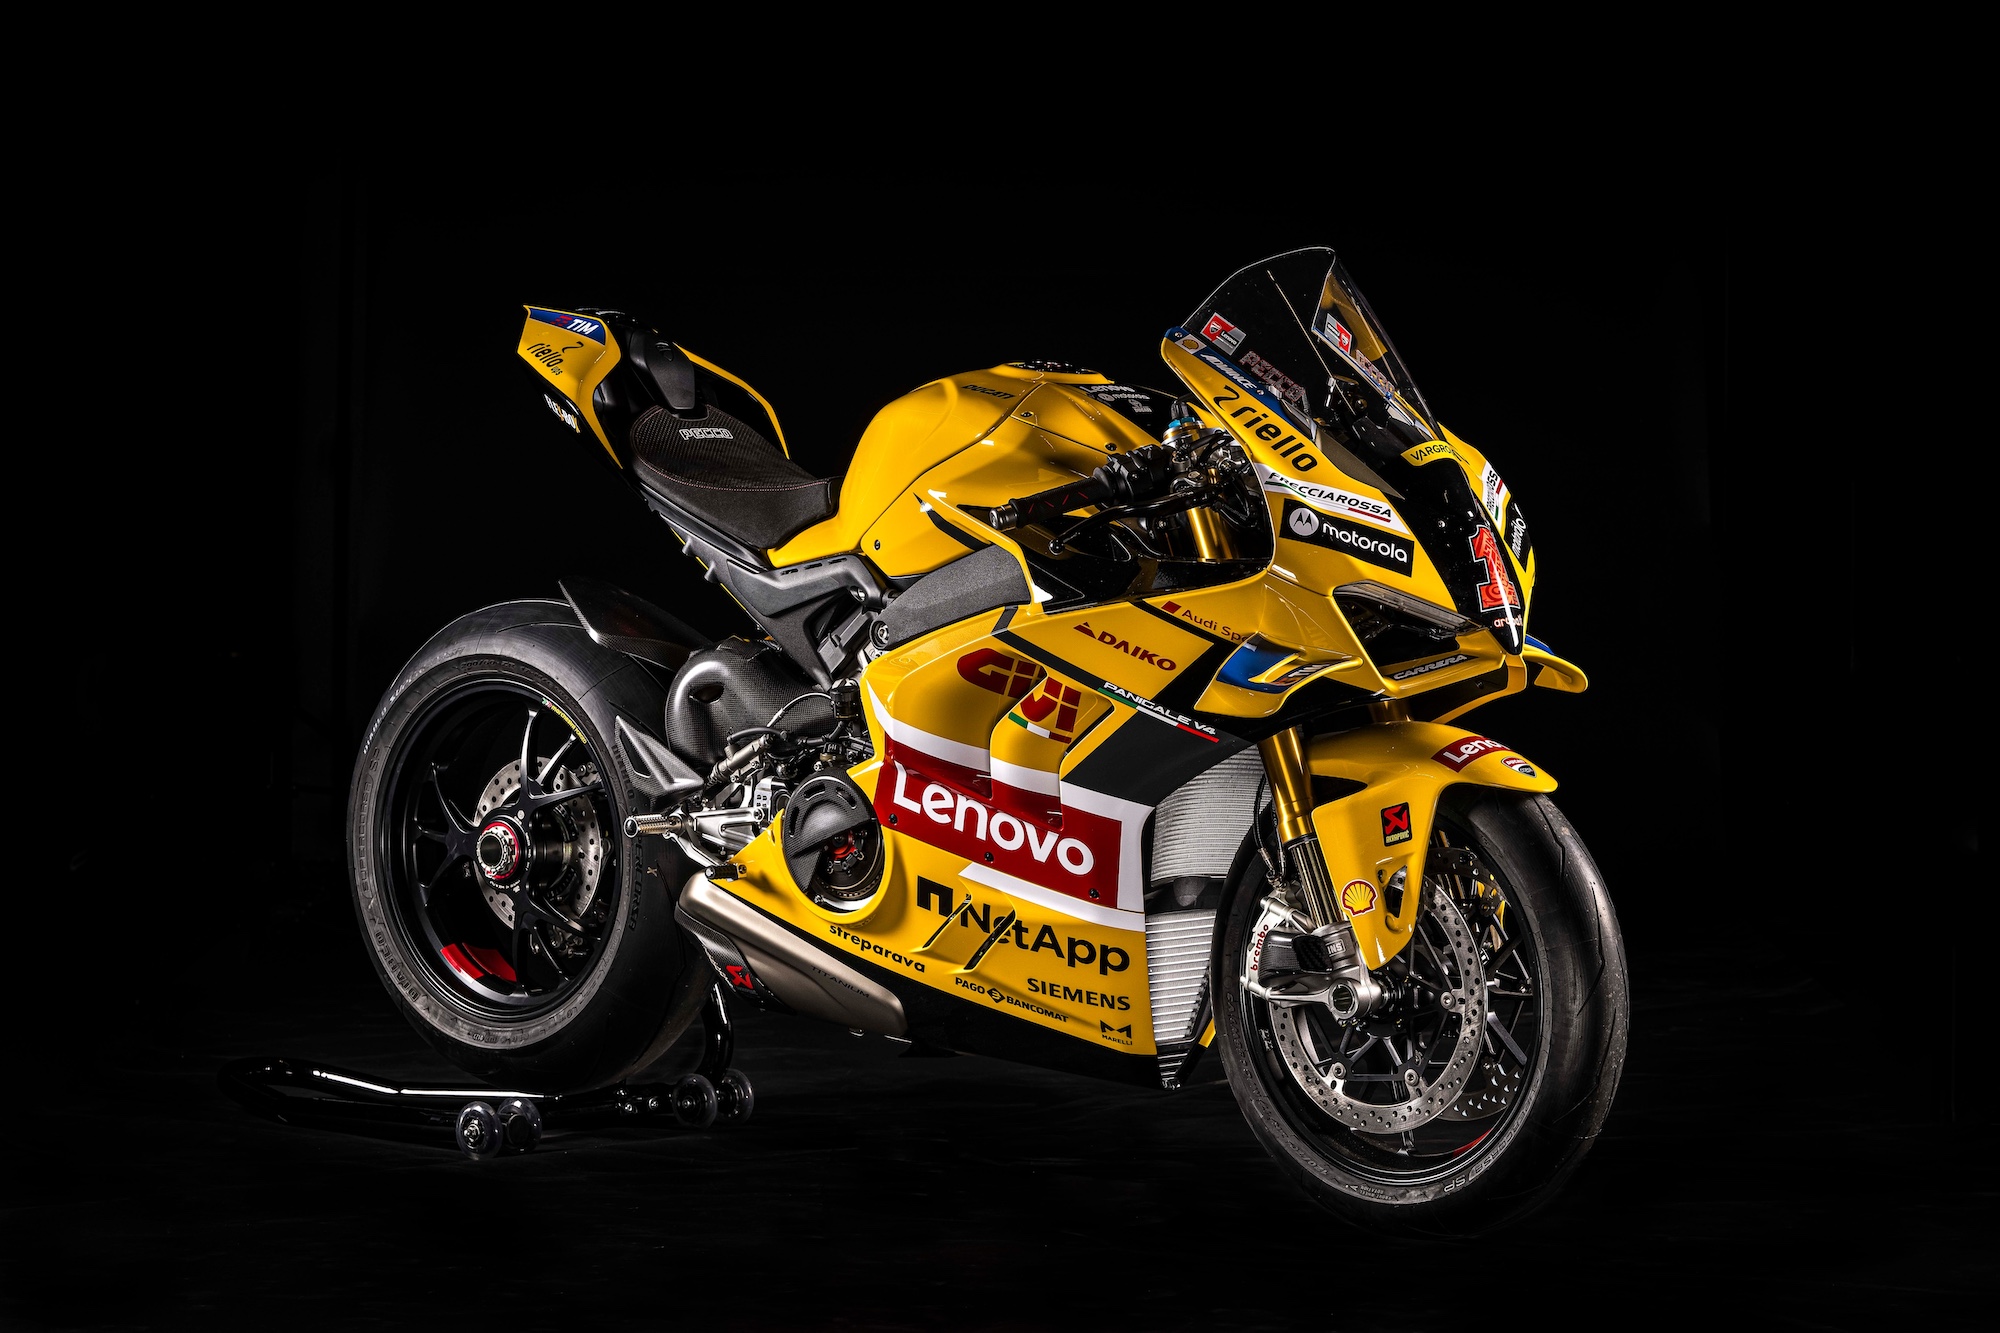 A view of the Panigale V4 Bagnaia 2023 World Champion Replica motorcycle.